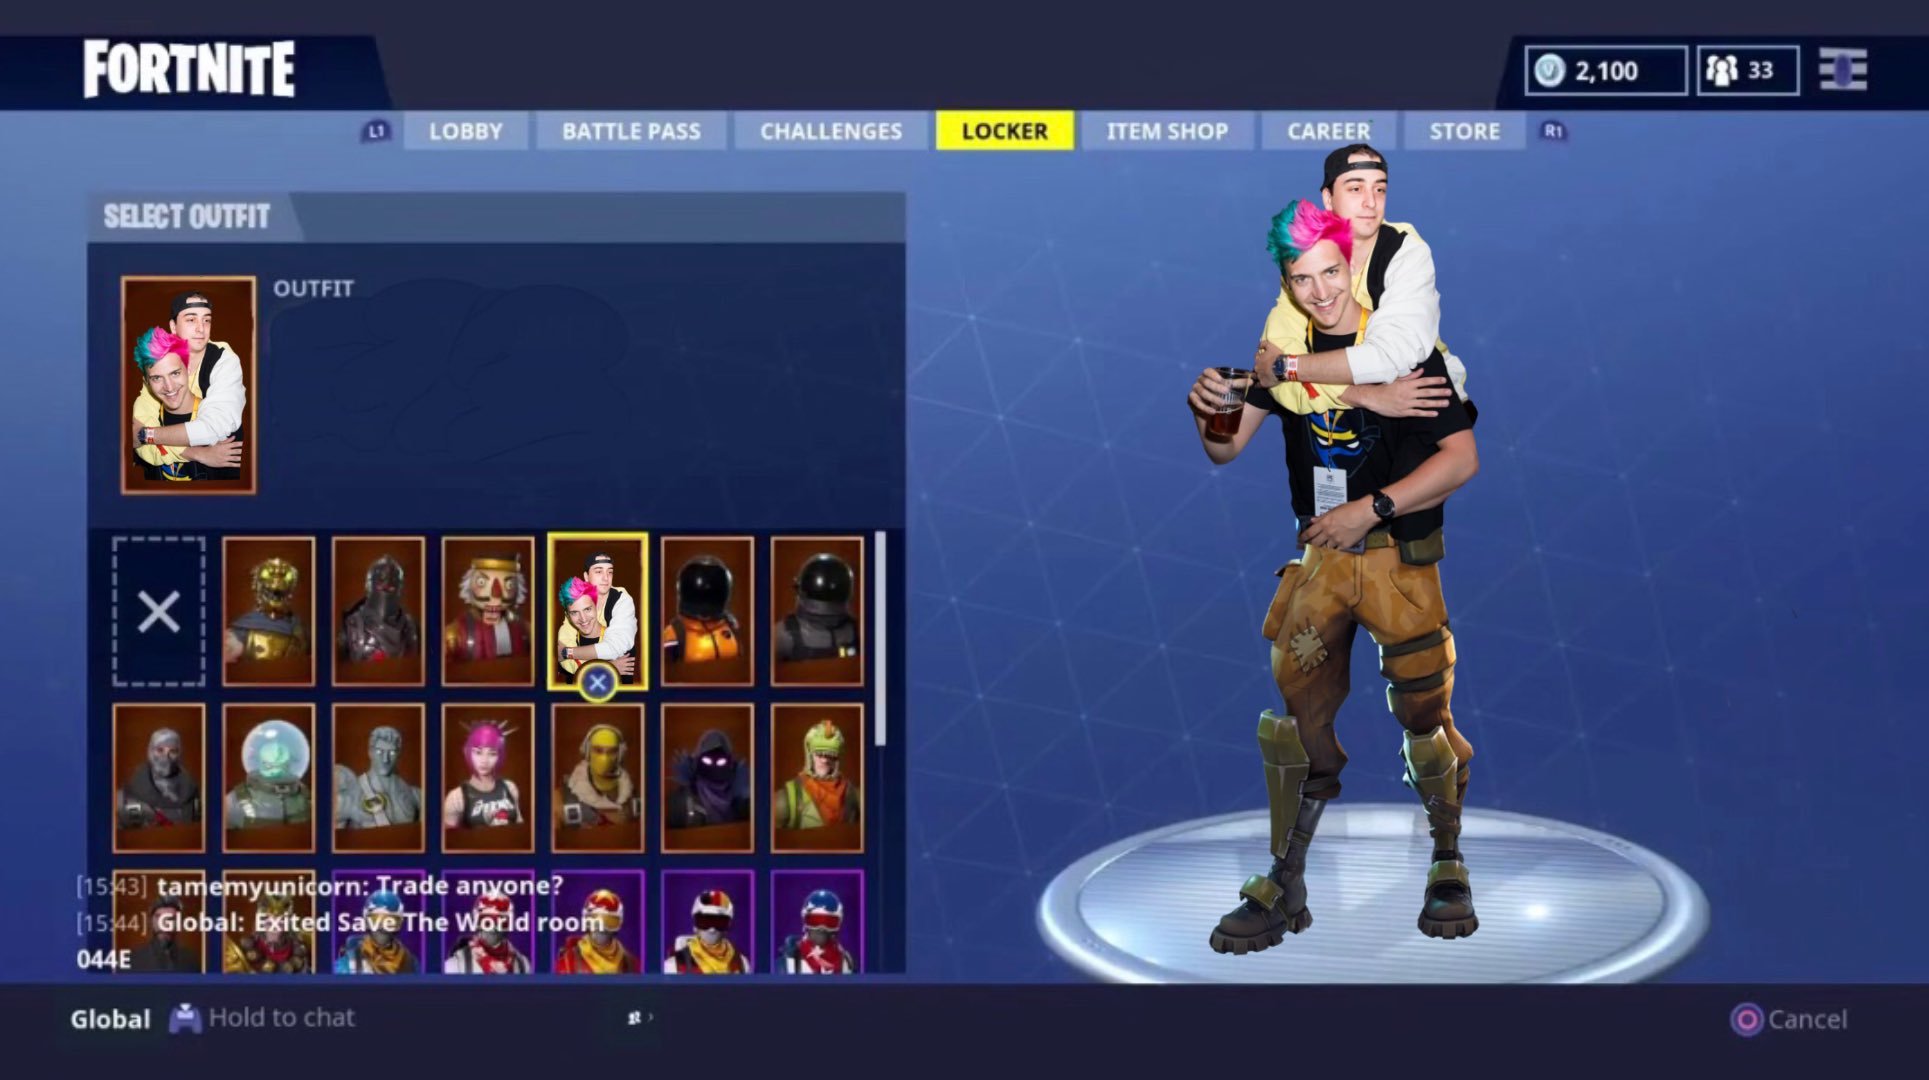 The icon for the Poki emote got replaced by Ramirez in place of